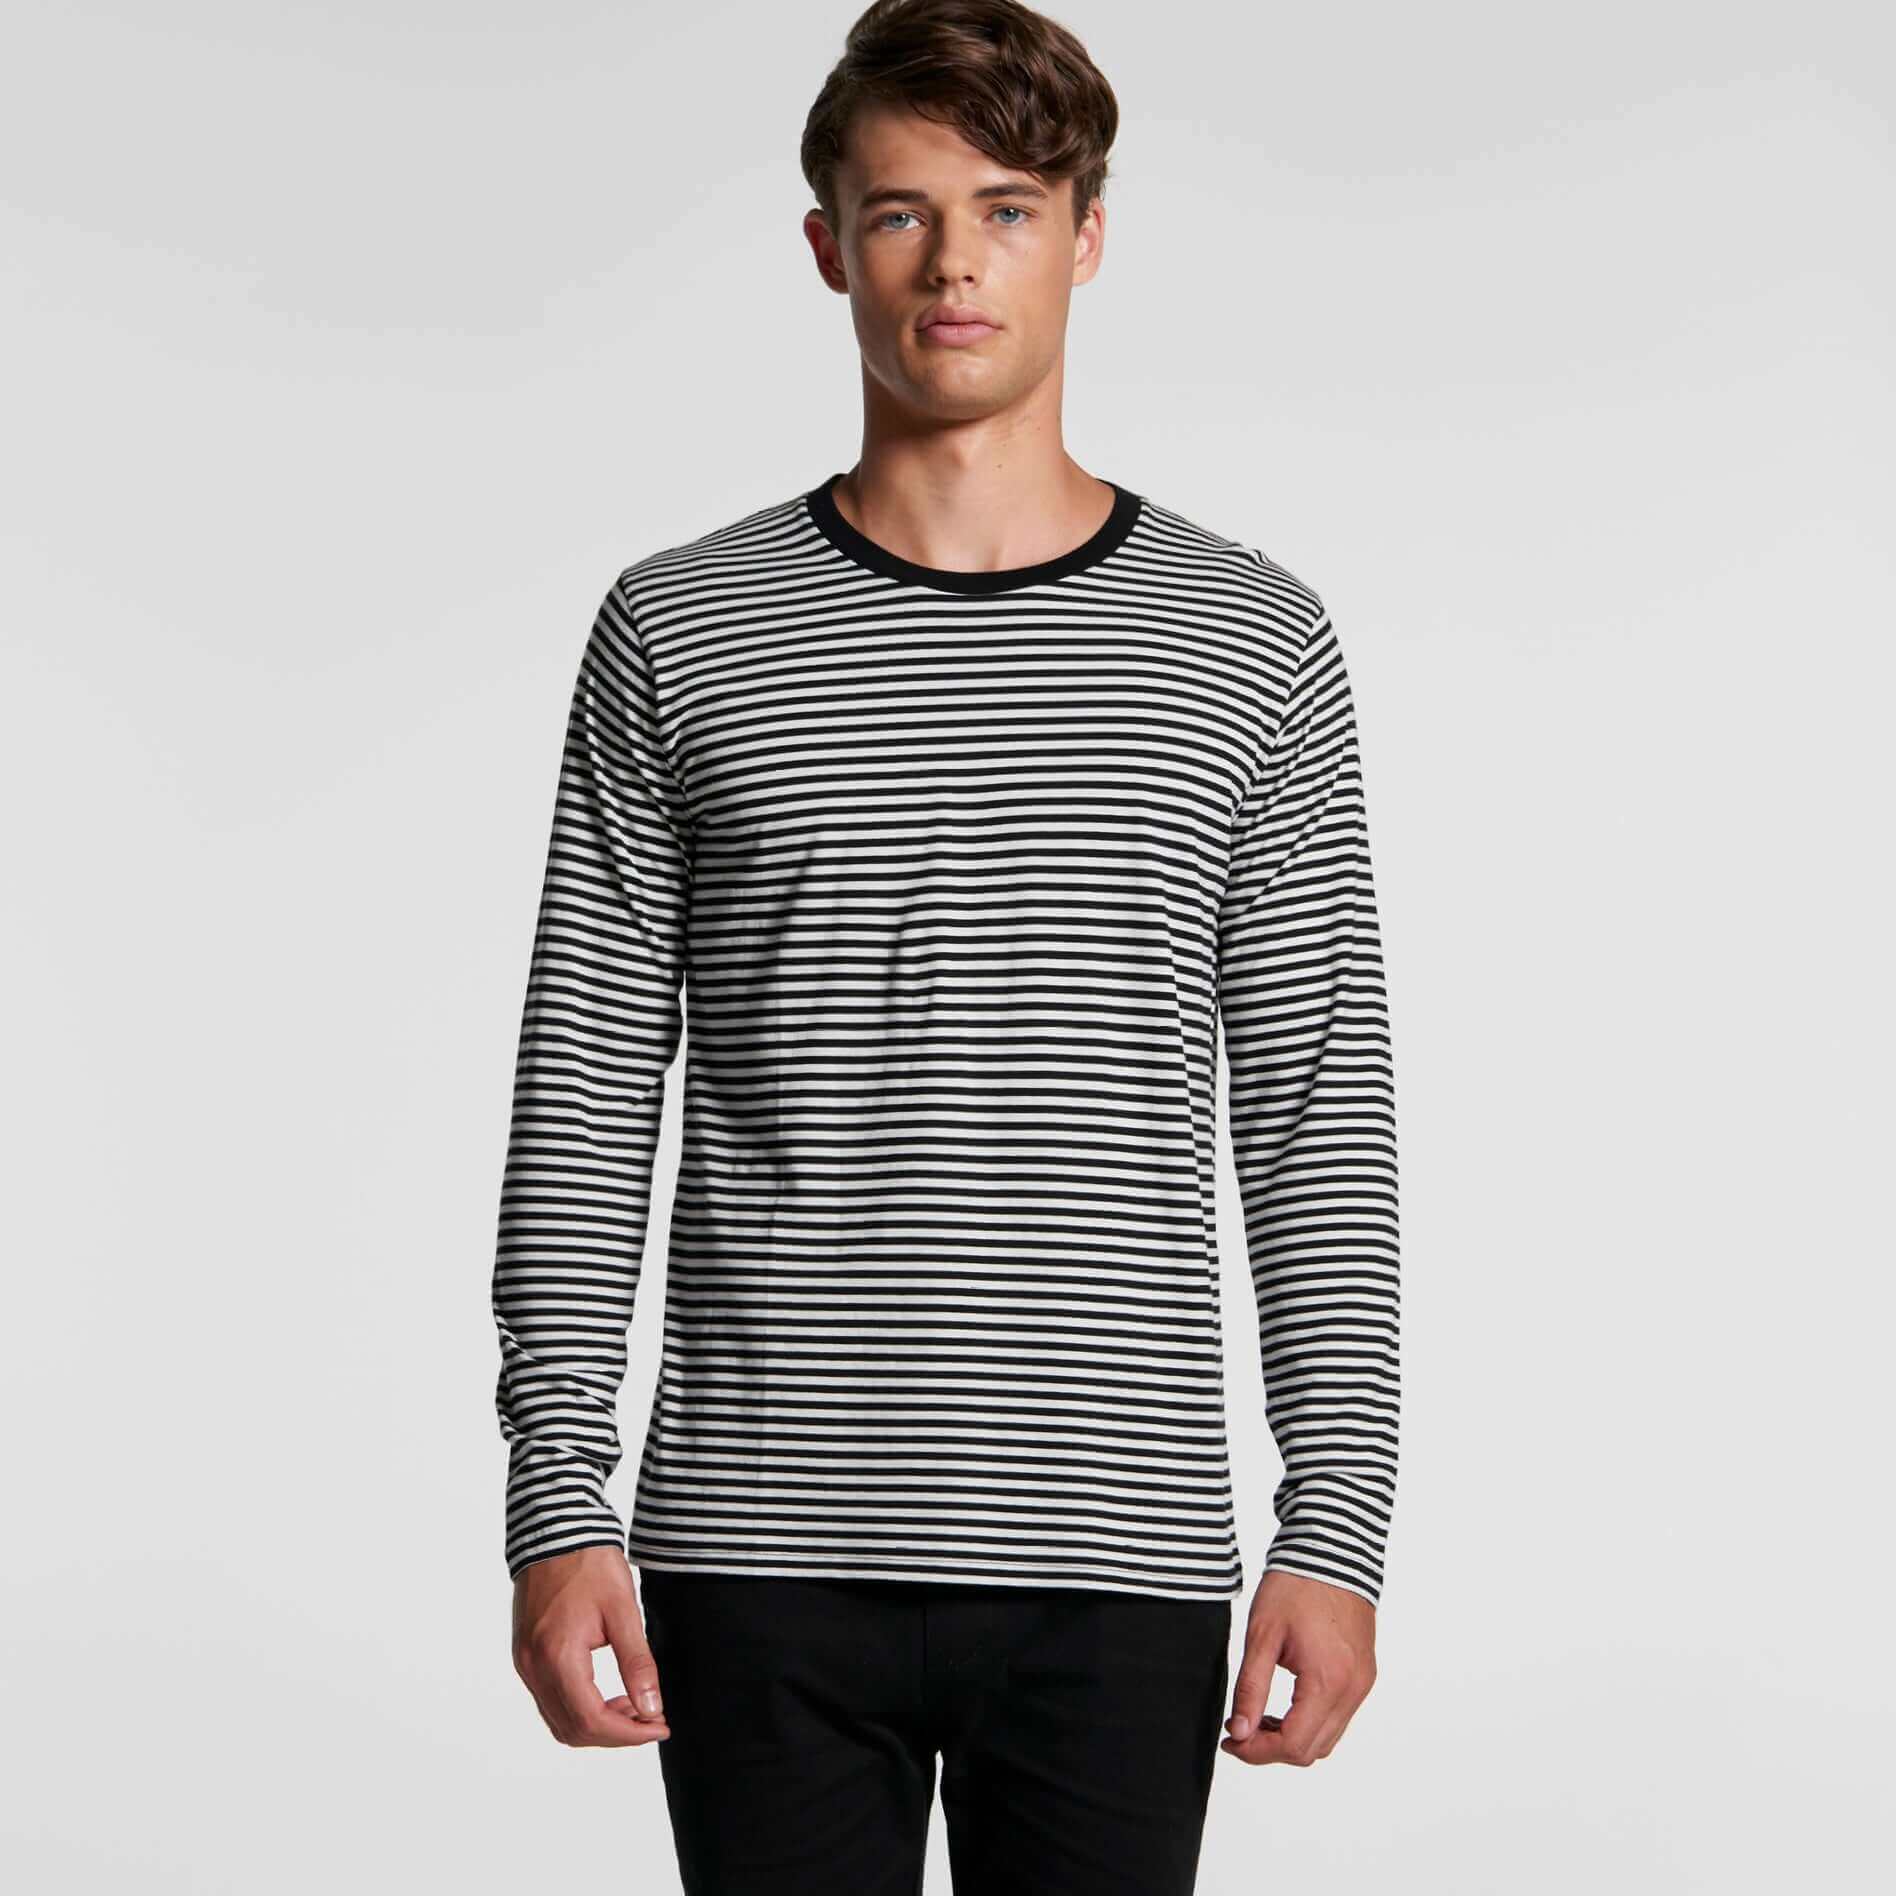 AS Colour BOWERY STRIPE LONG SLEEVE TEE - Natural/Black